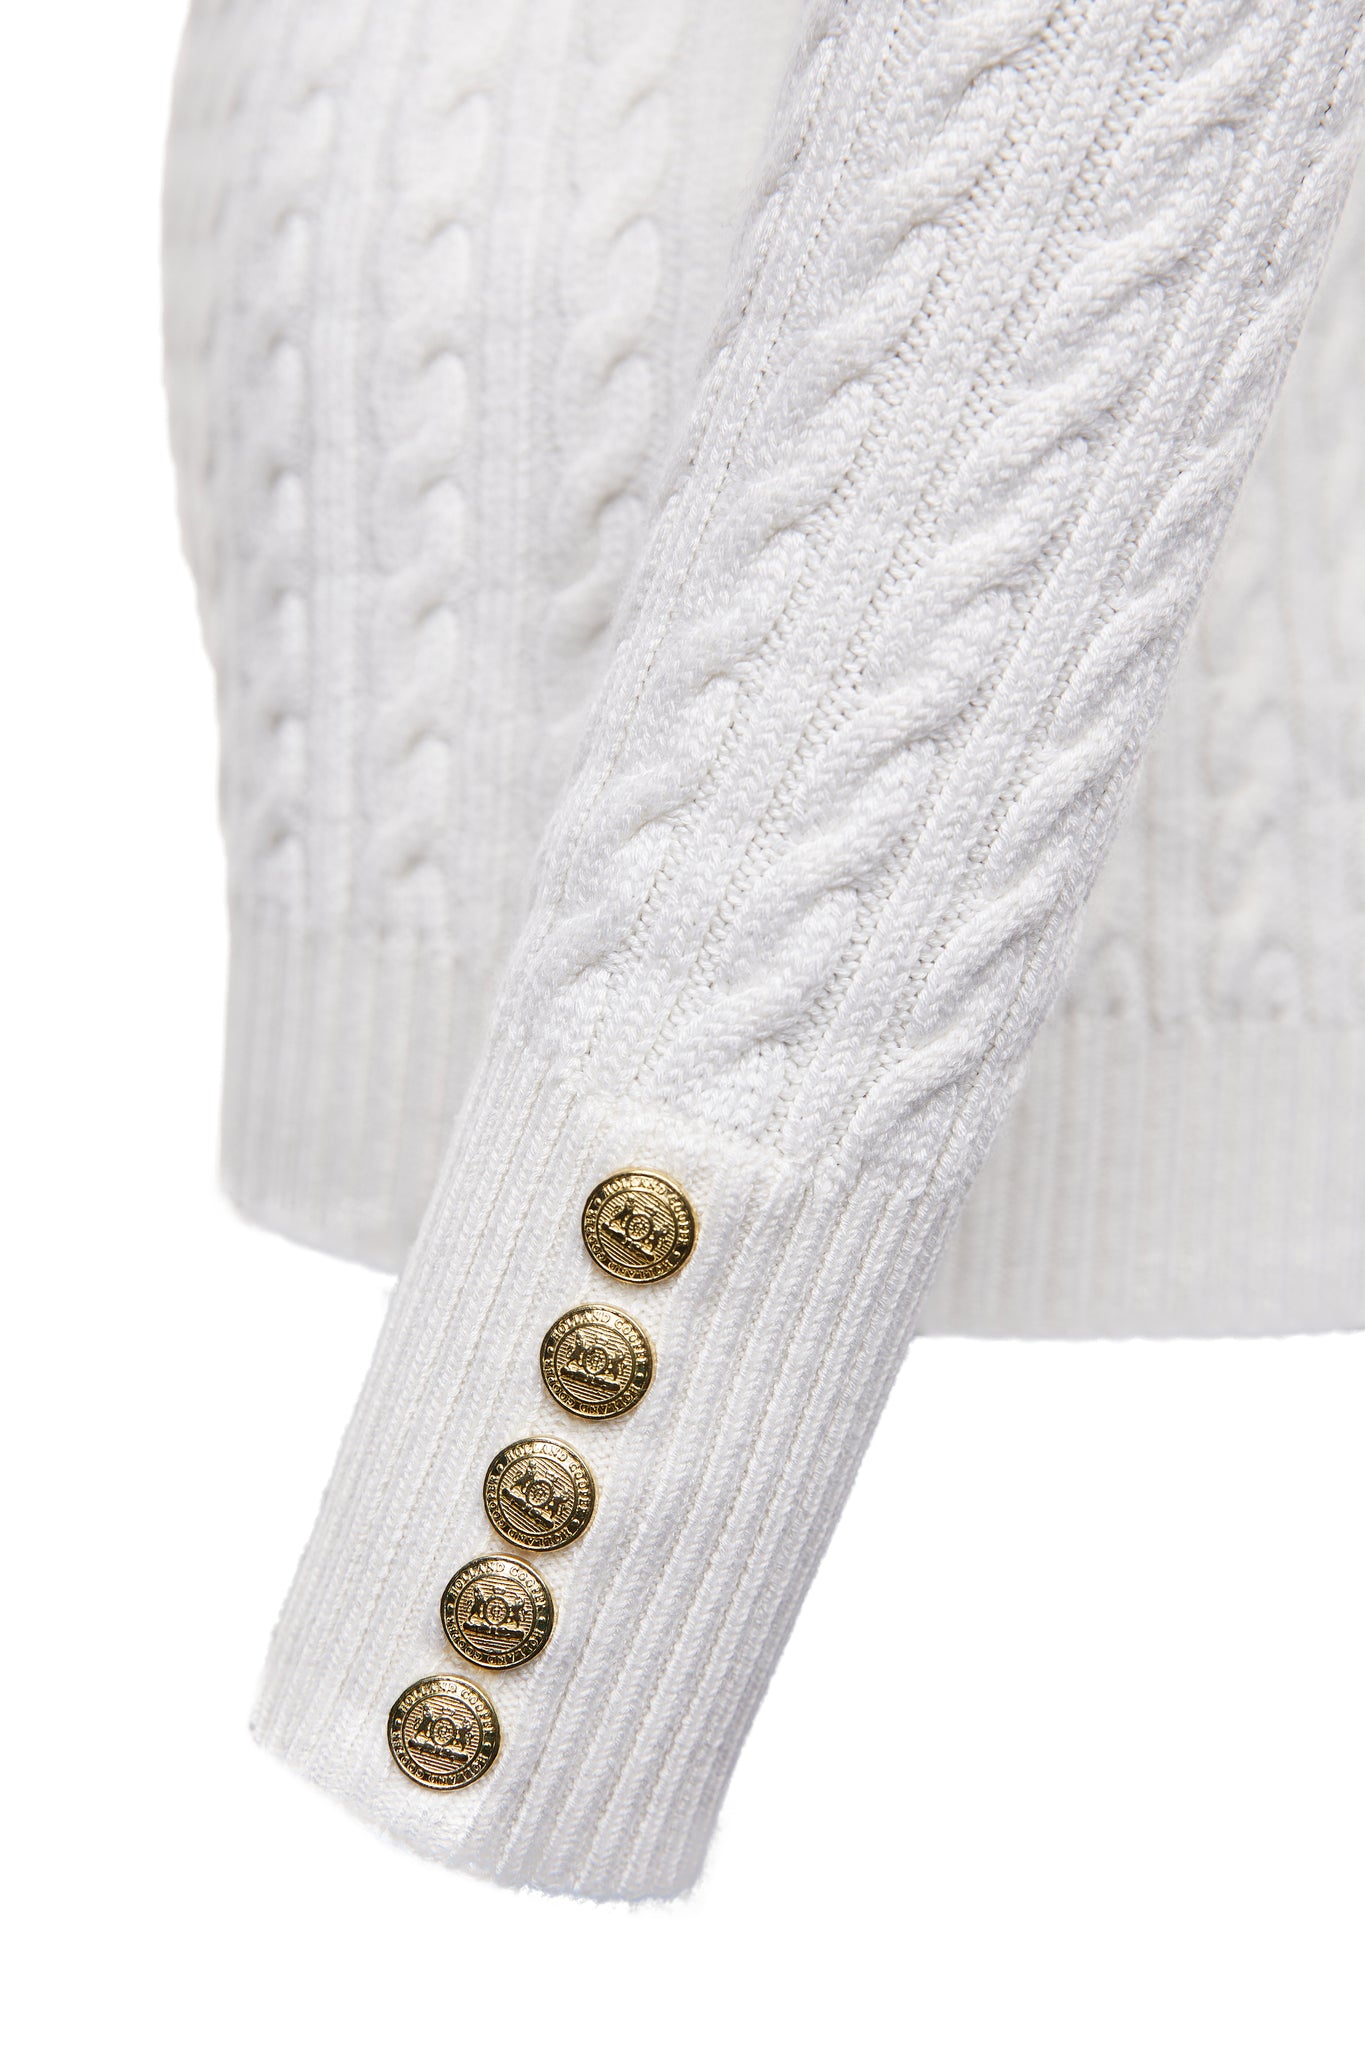 gold button detail on cuffs of womens cable knit jumper in white with ribbed crew neck cuffs and hem